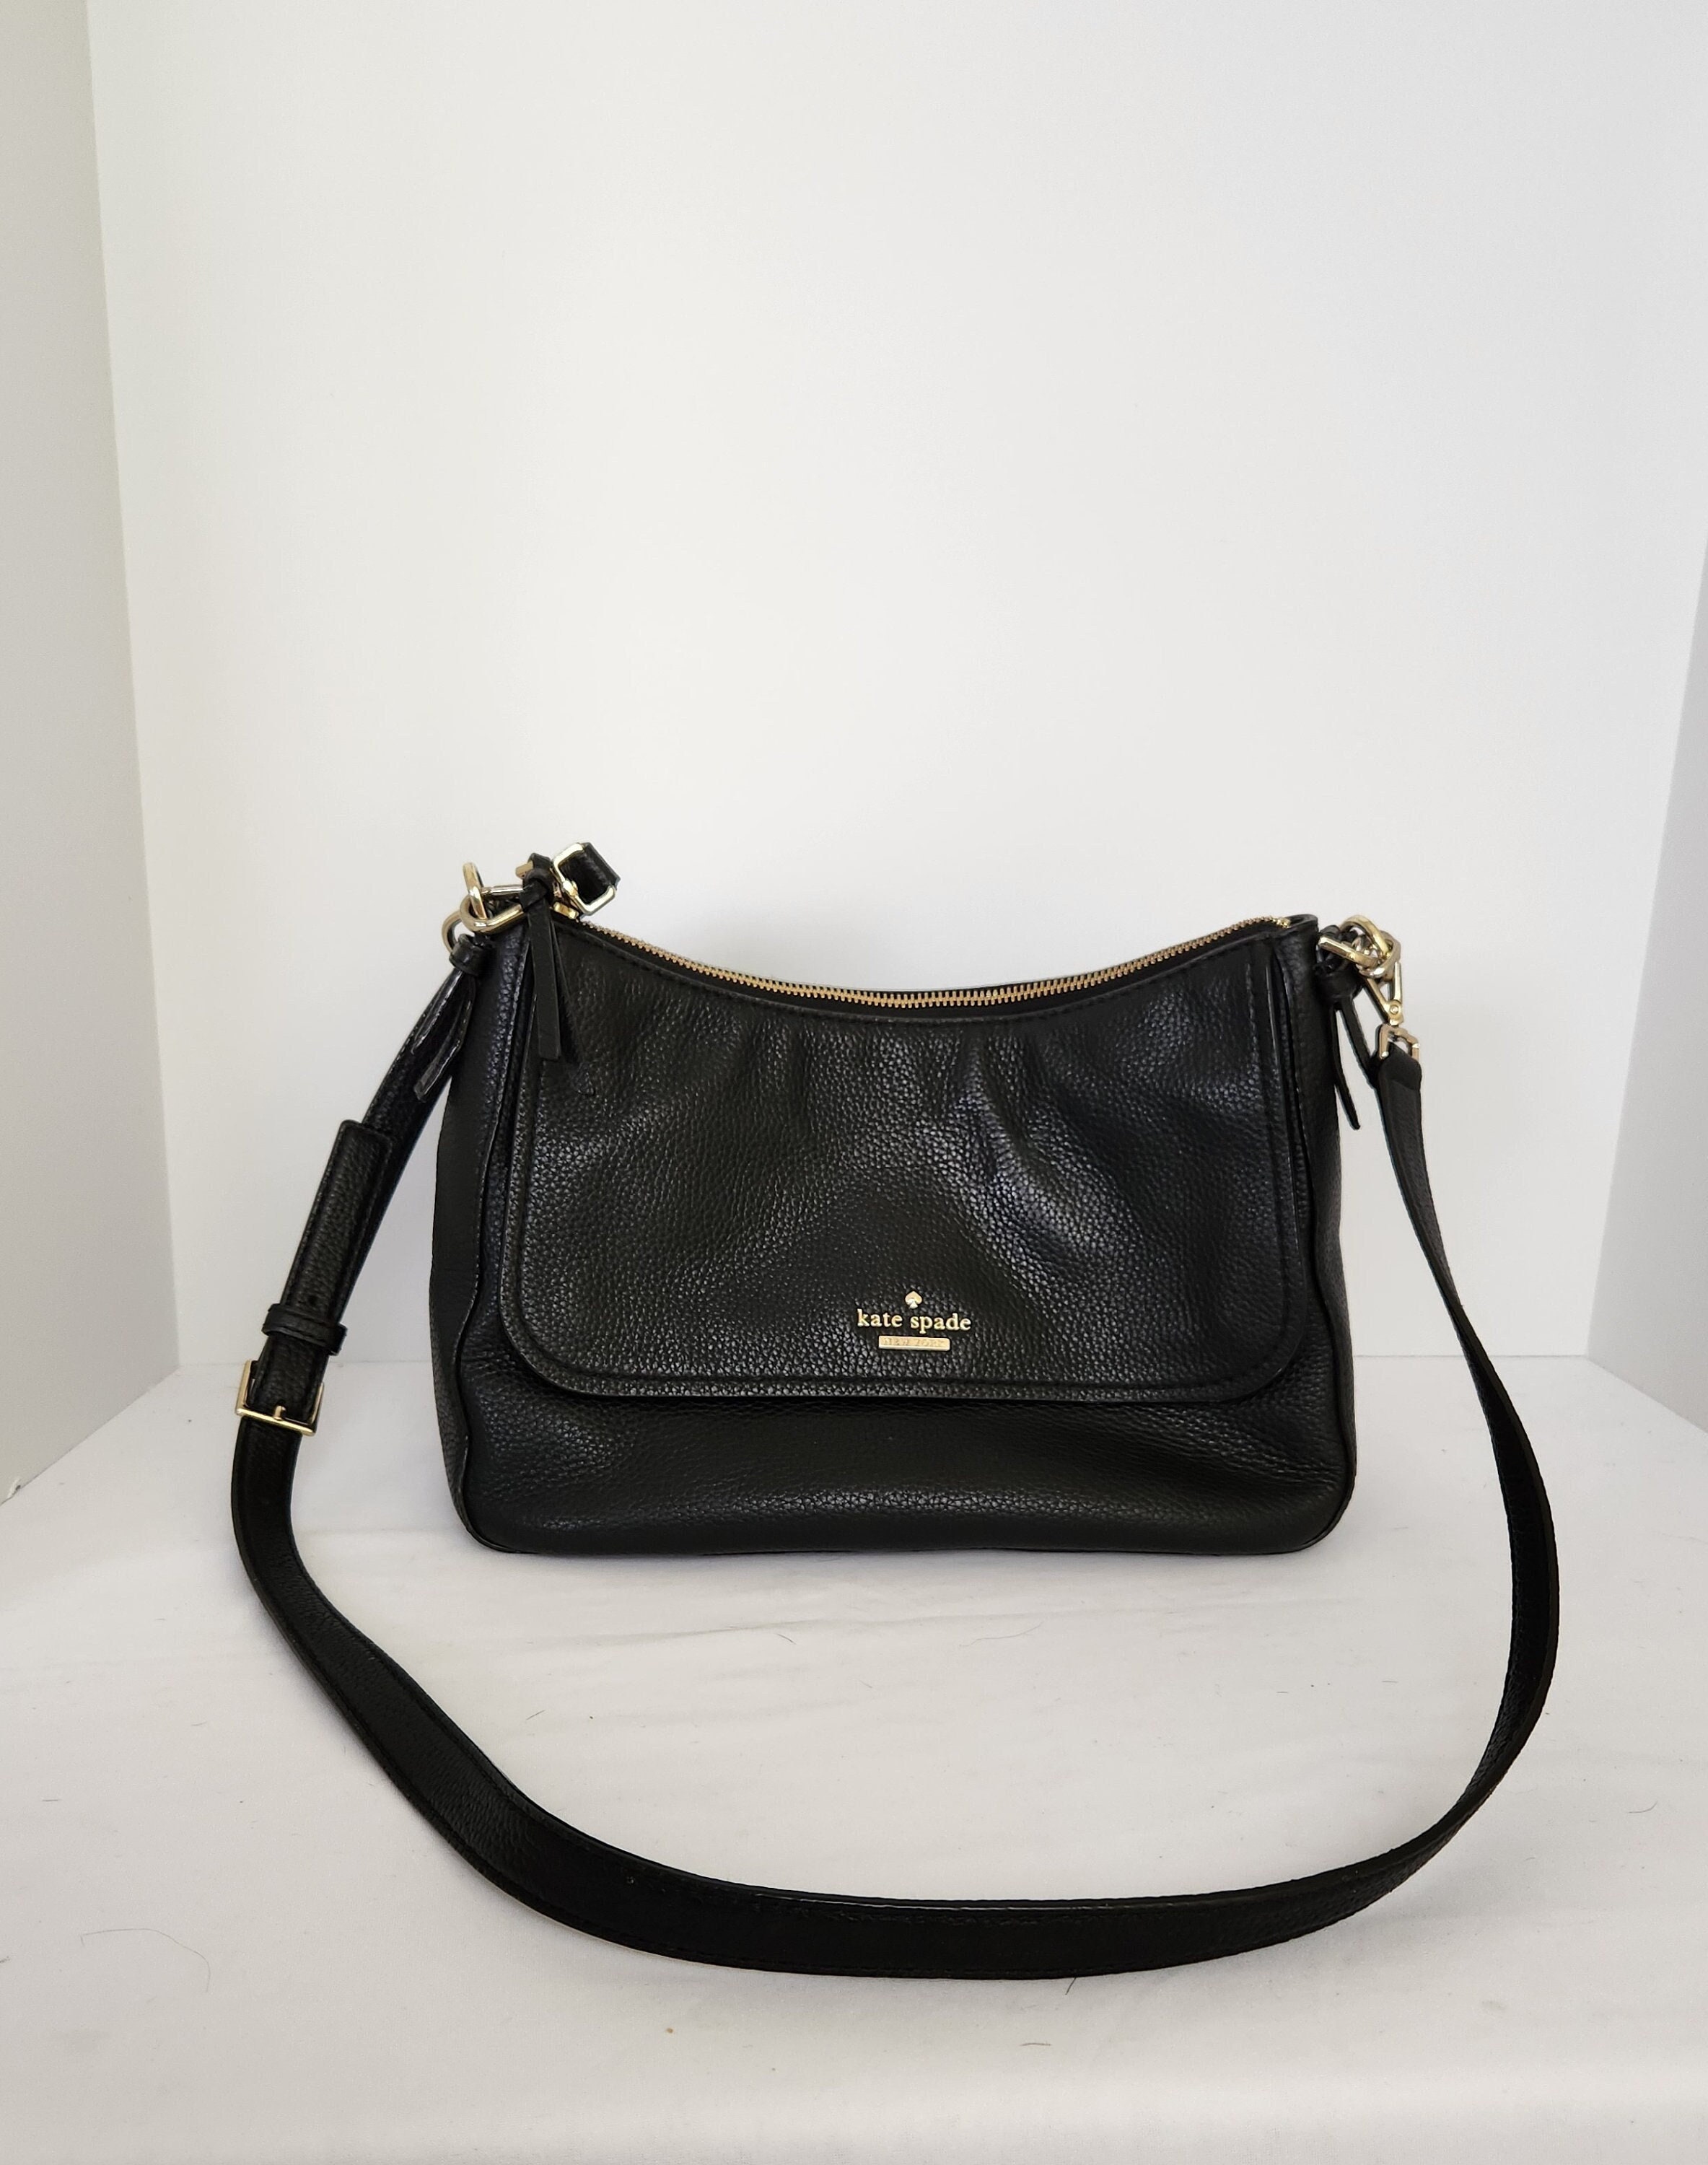 kate spade | Bags | Kate Spade Year Of The Pig Addison Leather Crossbody  Bag | Poshmark